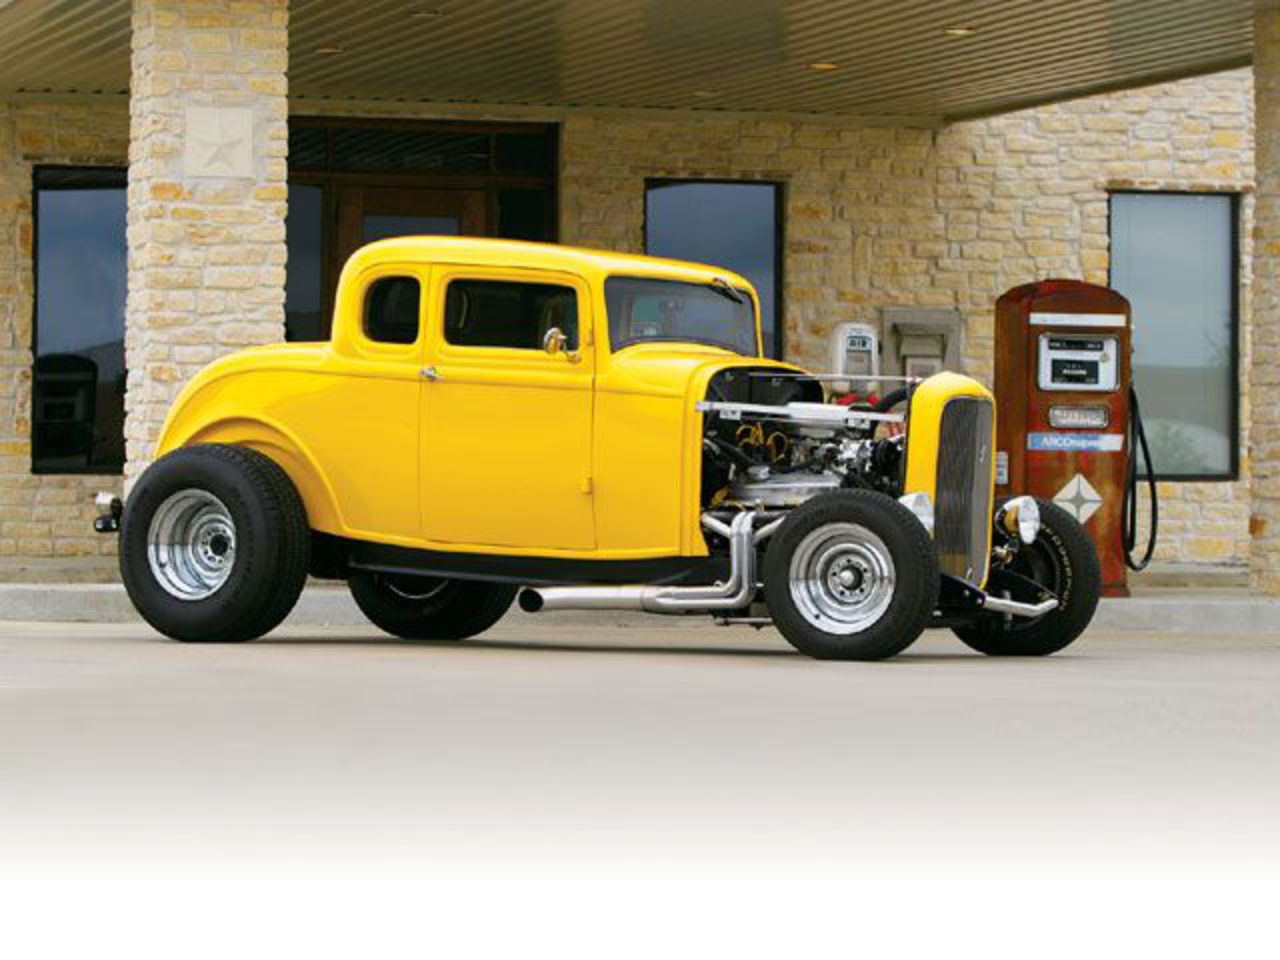 1932 Ford Five Window Coupe And 1965 Backdraft Racing Roadster.